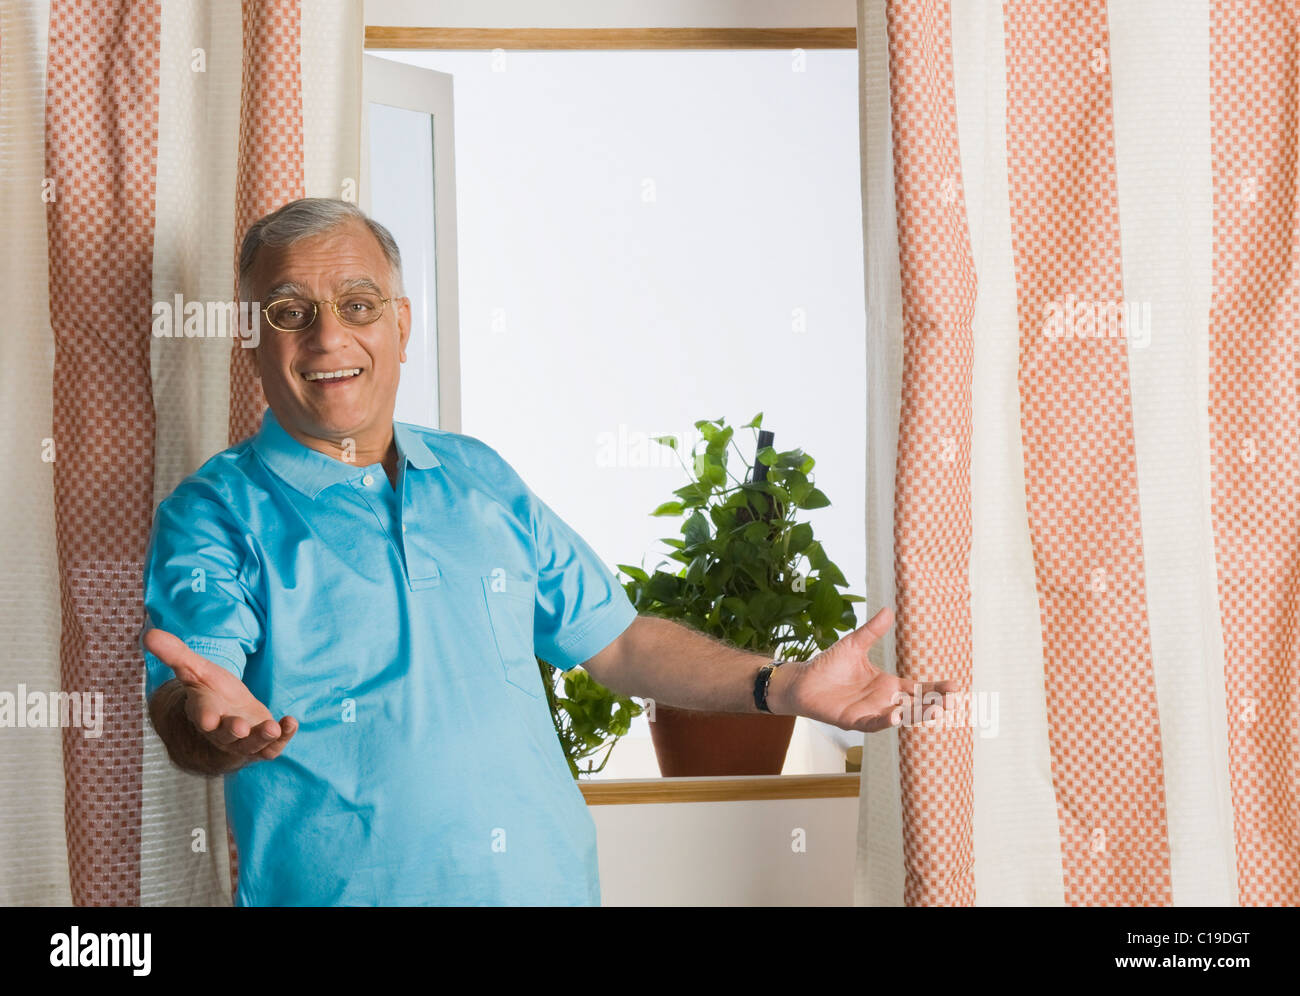 Portrait of a man smiling at home Stock Photo